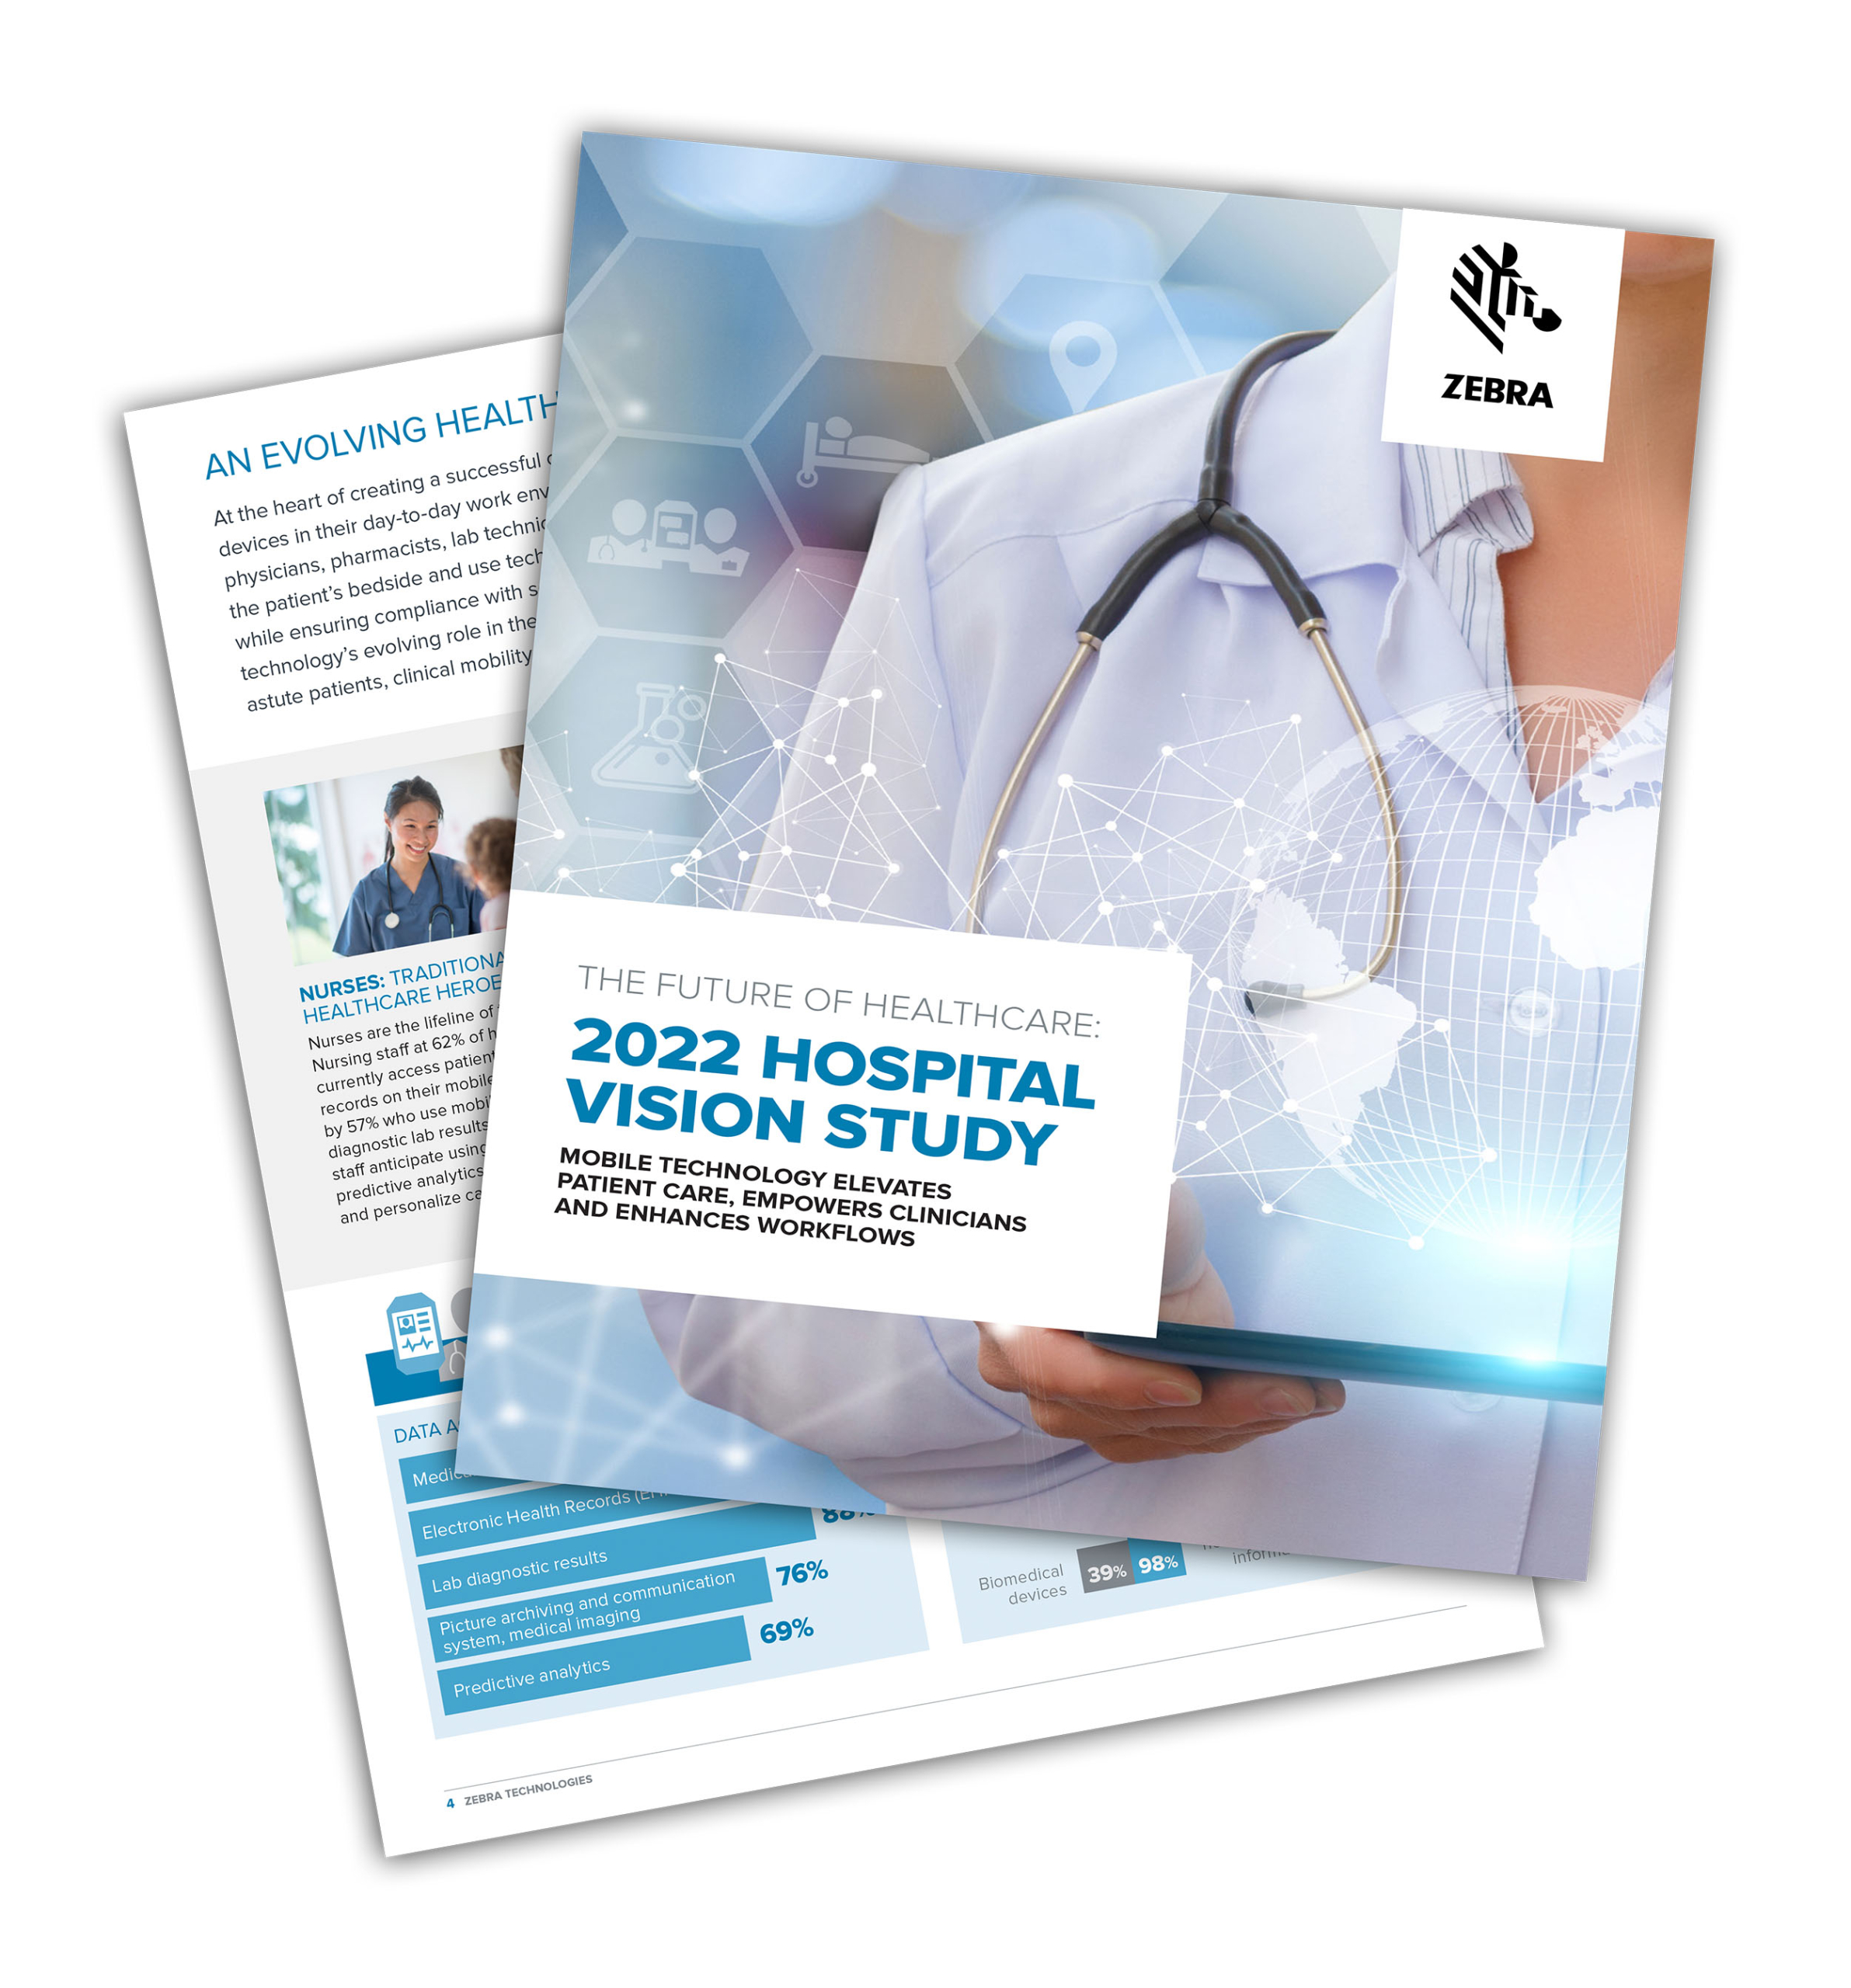 The Future of Healthcare: 2022 Hospital Vision Study